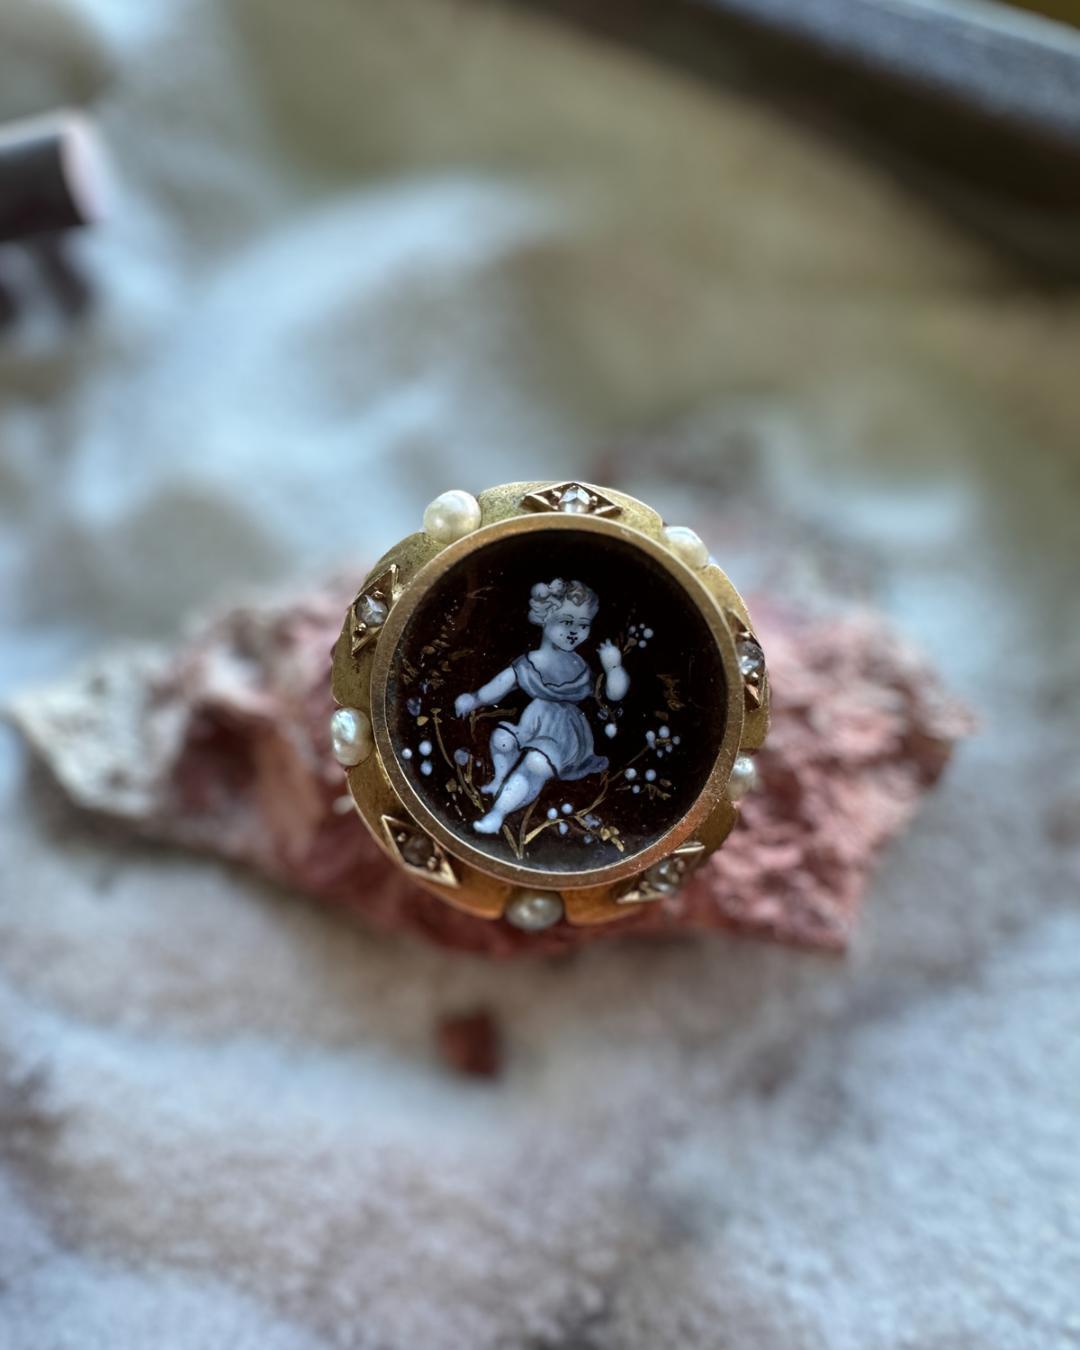 This exquisite Victorian pin features diamond, beautifully hand painted porcelain, and a delicate pearl. In good condition with minor surface wear, it exudes the elegant charm of the Victorian era. A stunning addition to any jewelry collection, with